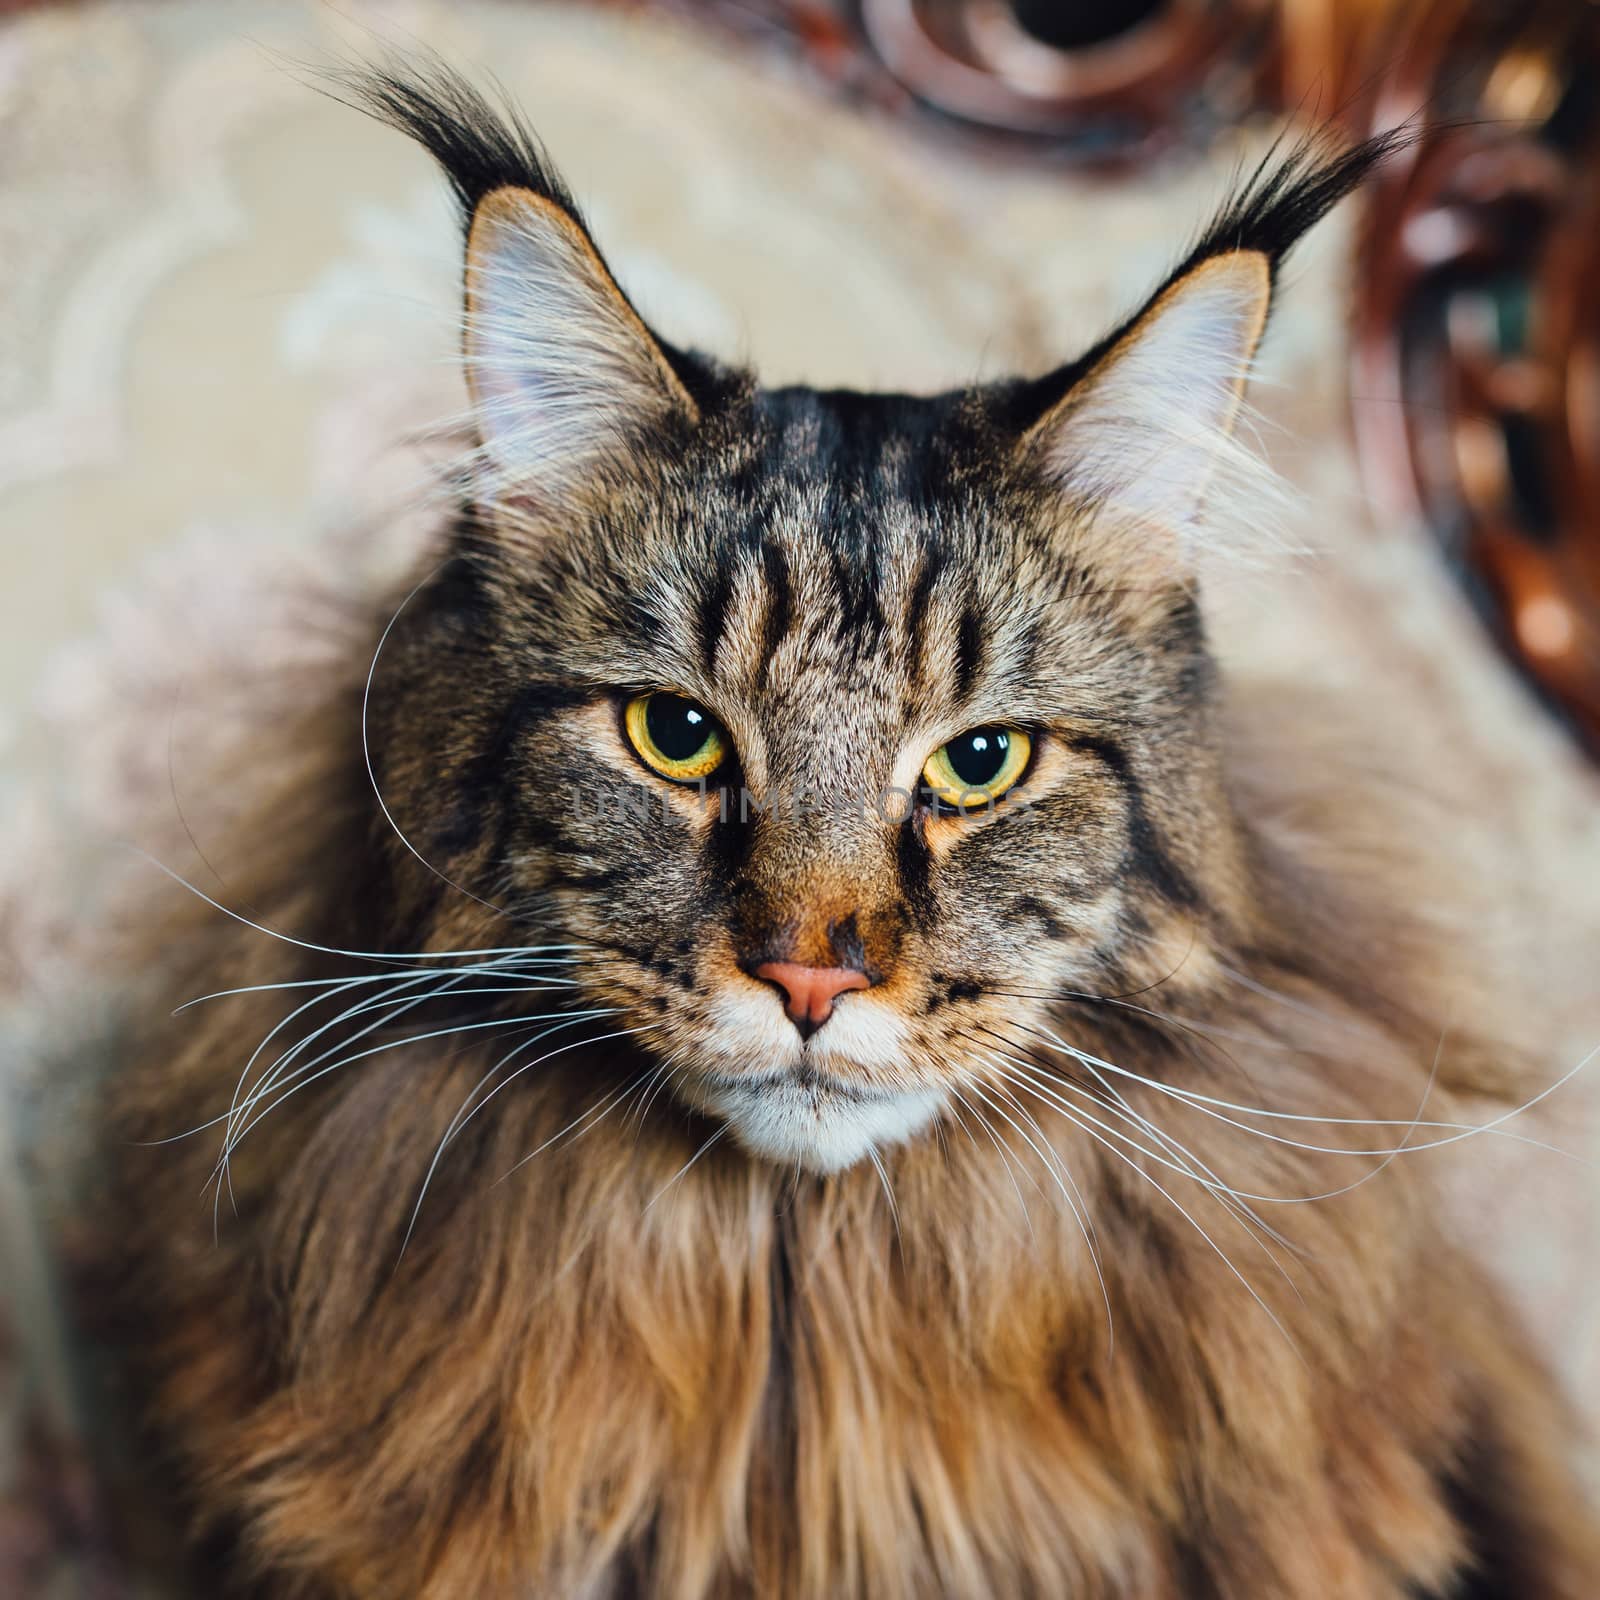 Maine Coon cat, close-up view by nikkytok